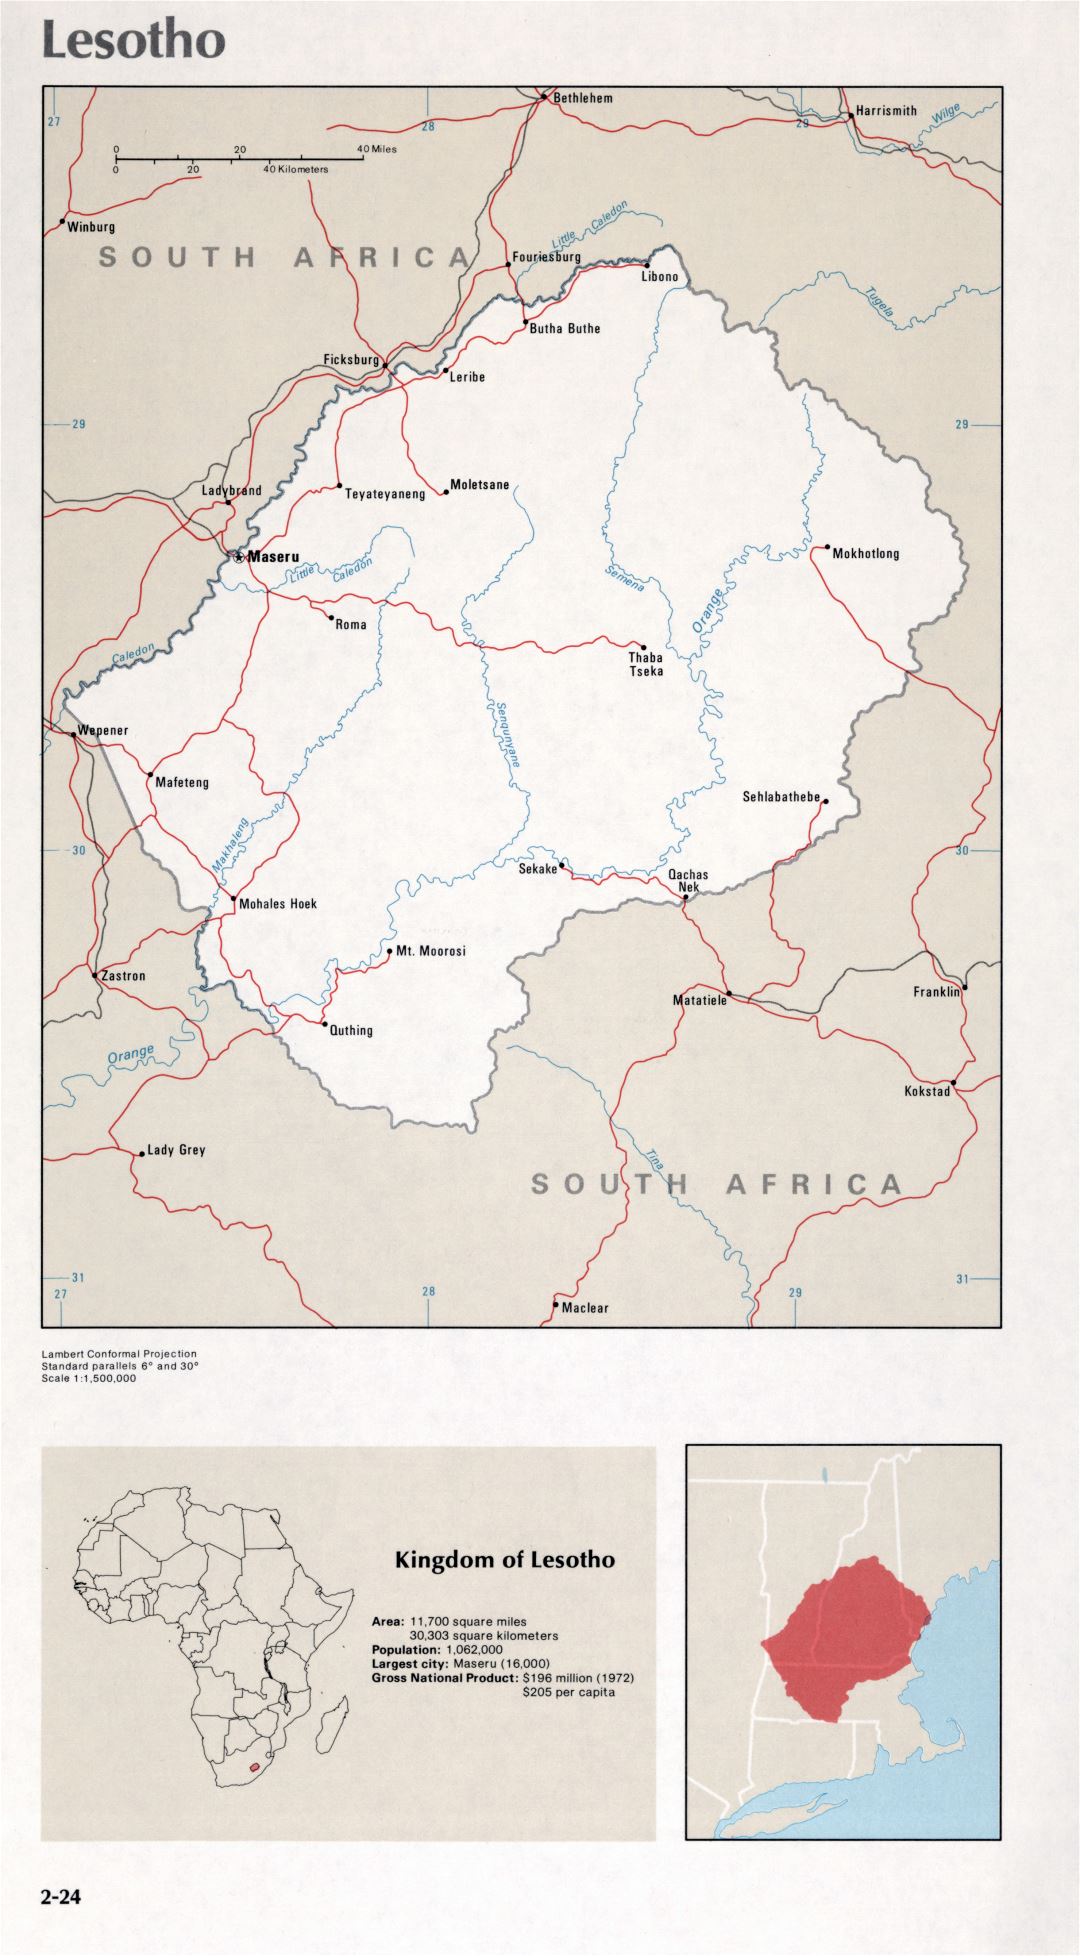 Map of Lesotho (2-24)